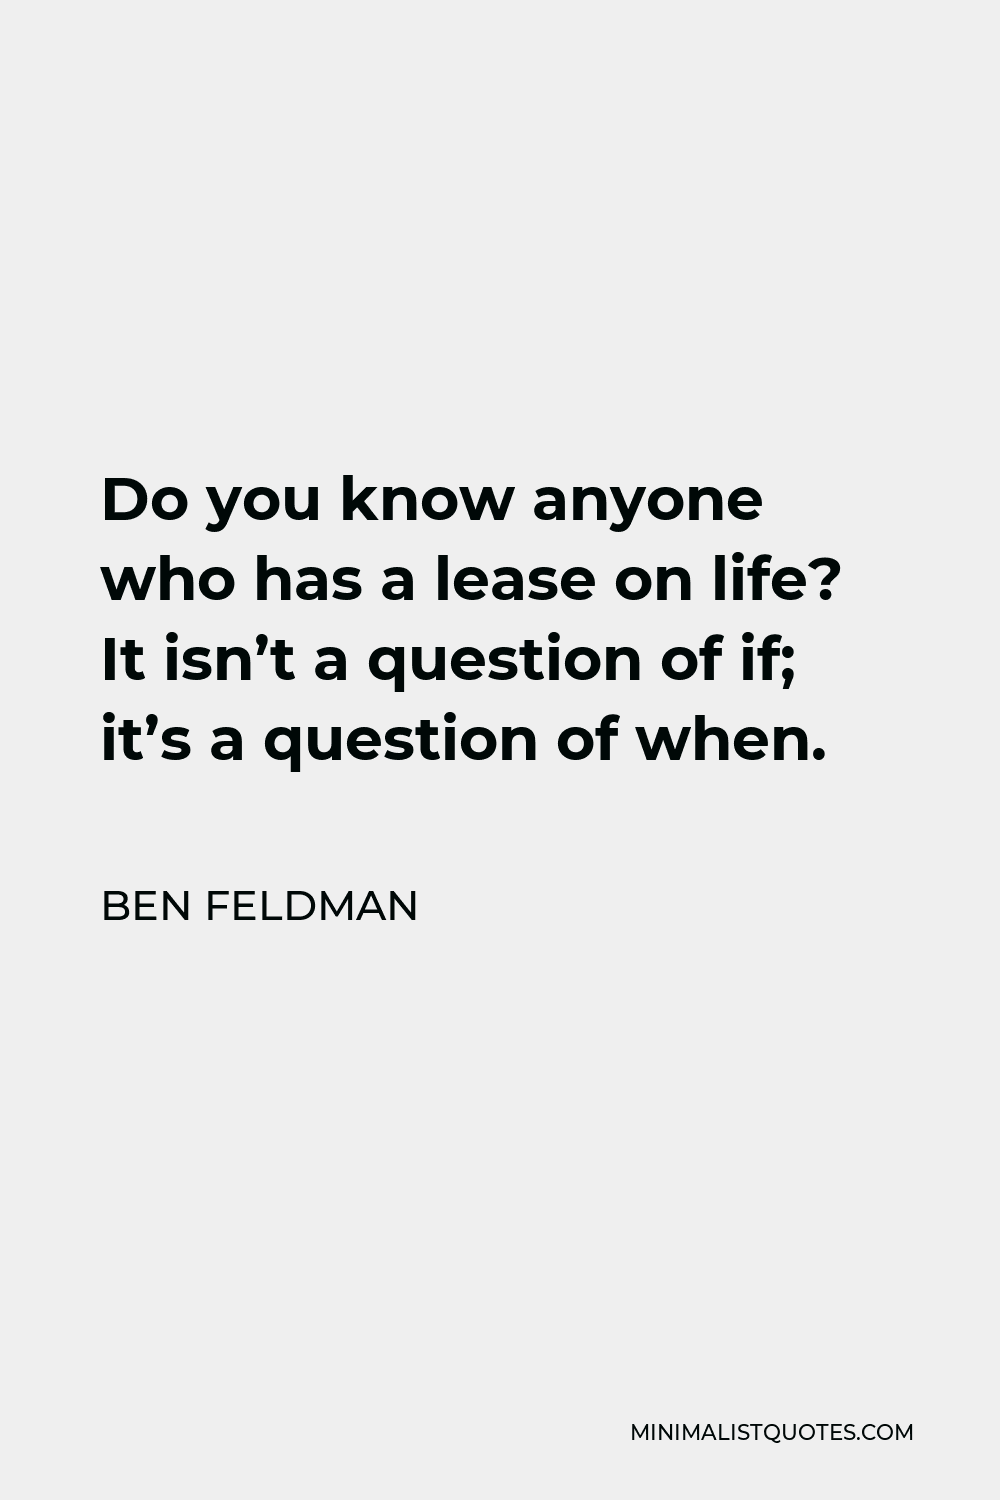 Ben Feldman Quote - Do you know anyone who has a lease on life? It isn’t a question of if; it’s a question of when.